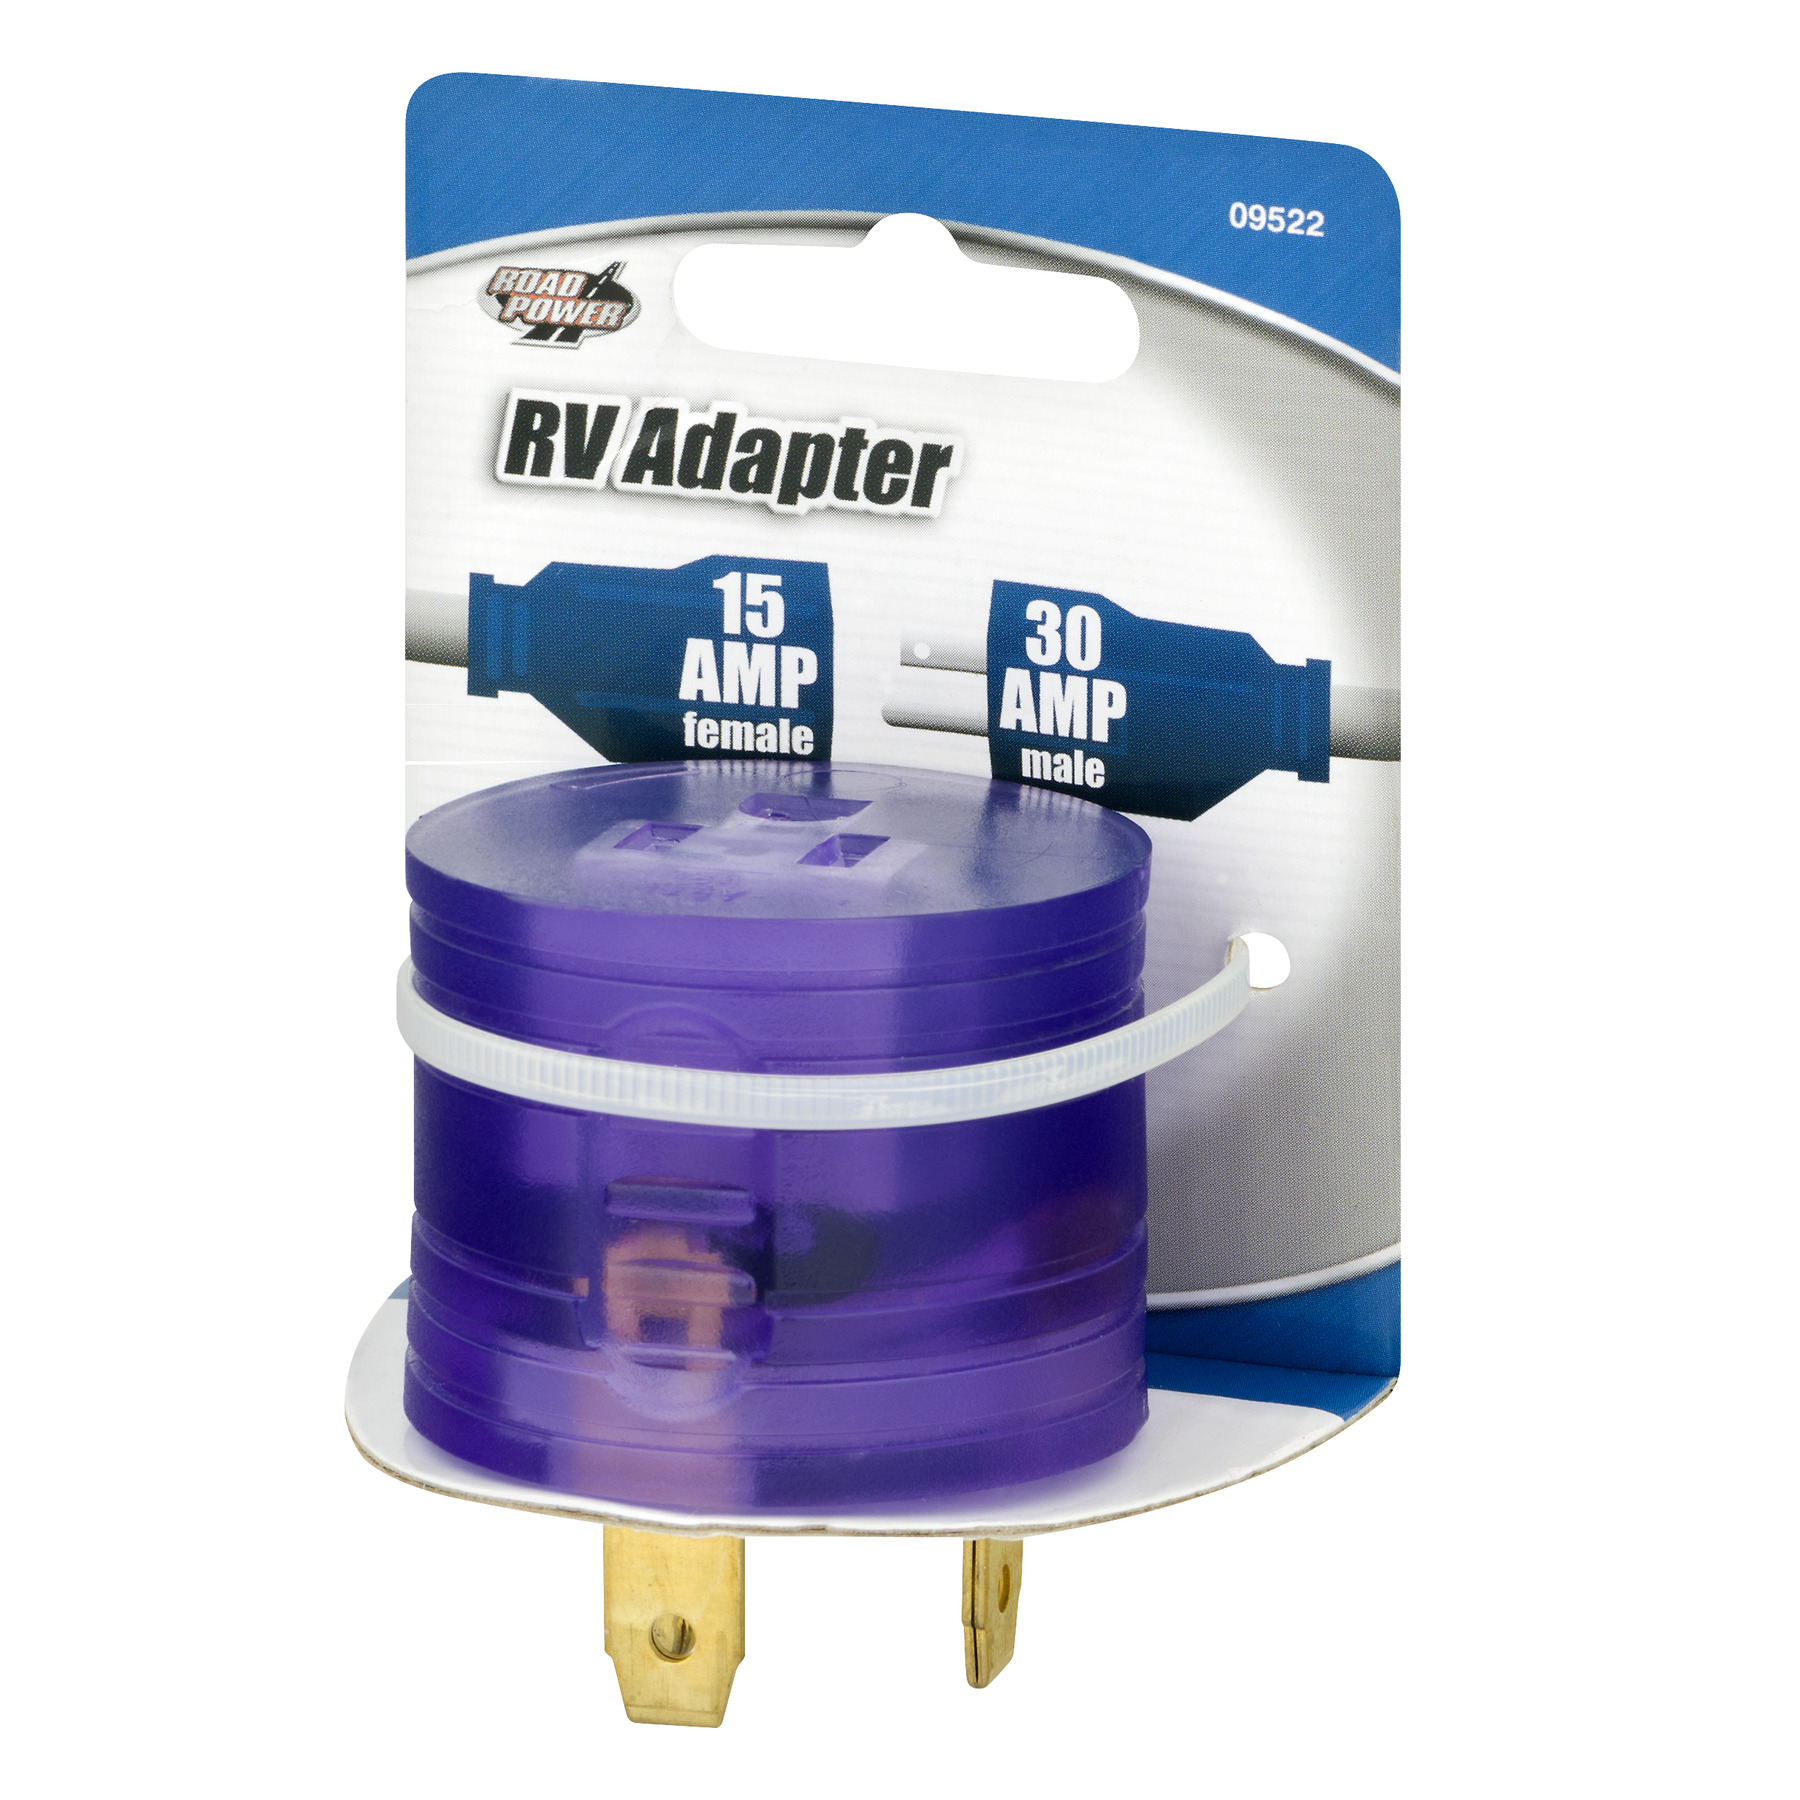 Road Power 30-15-Amp RV Power Adapter - image 3 of 5